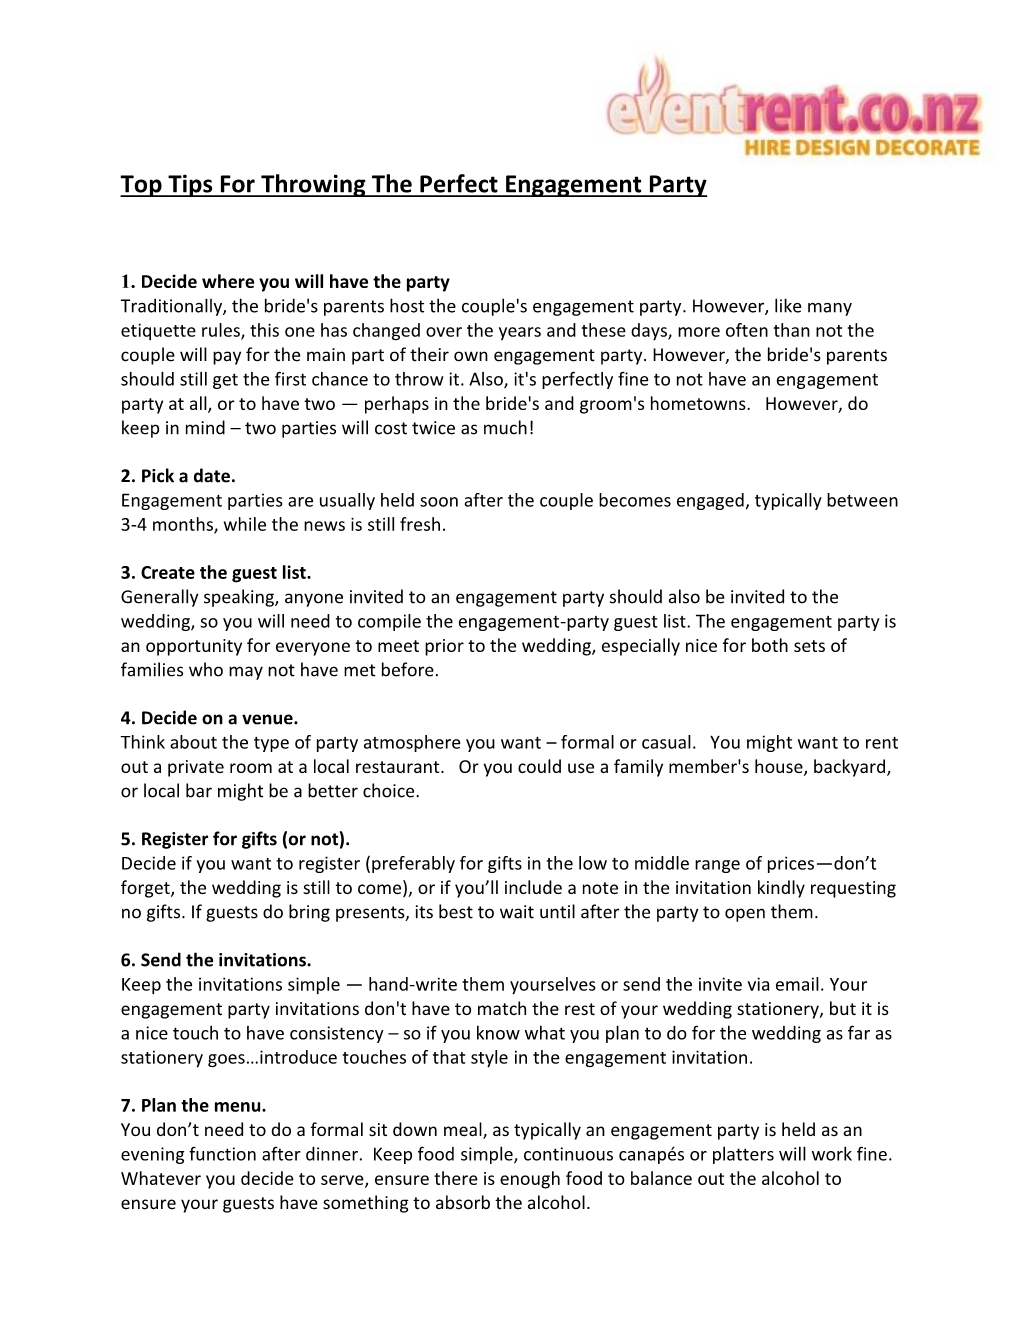 Top Tips for Throwing the Perfect Engagement Party